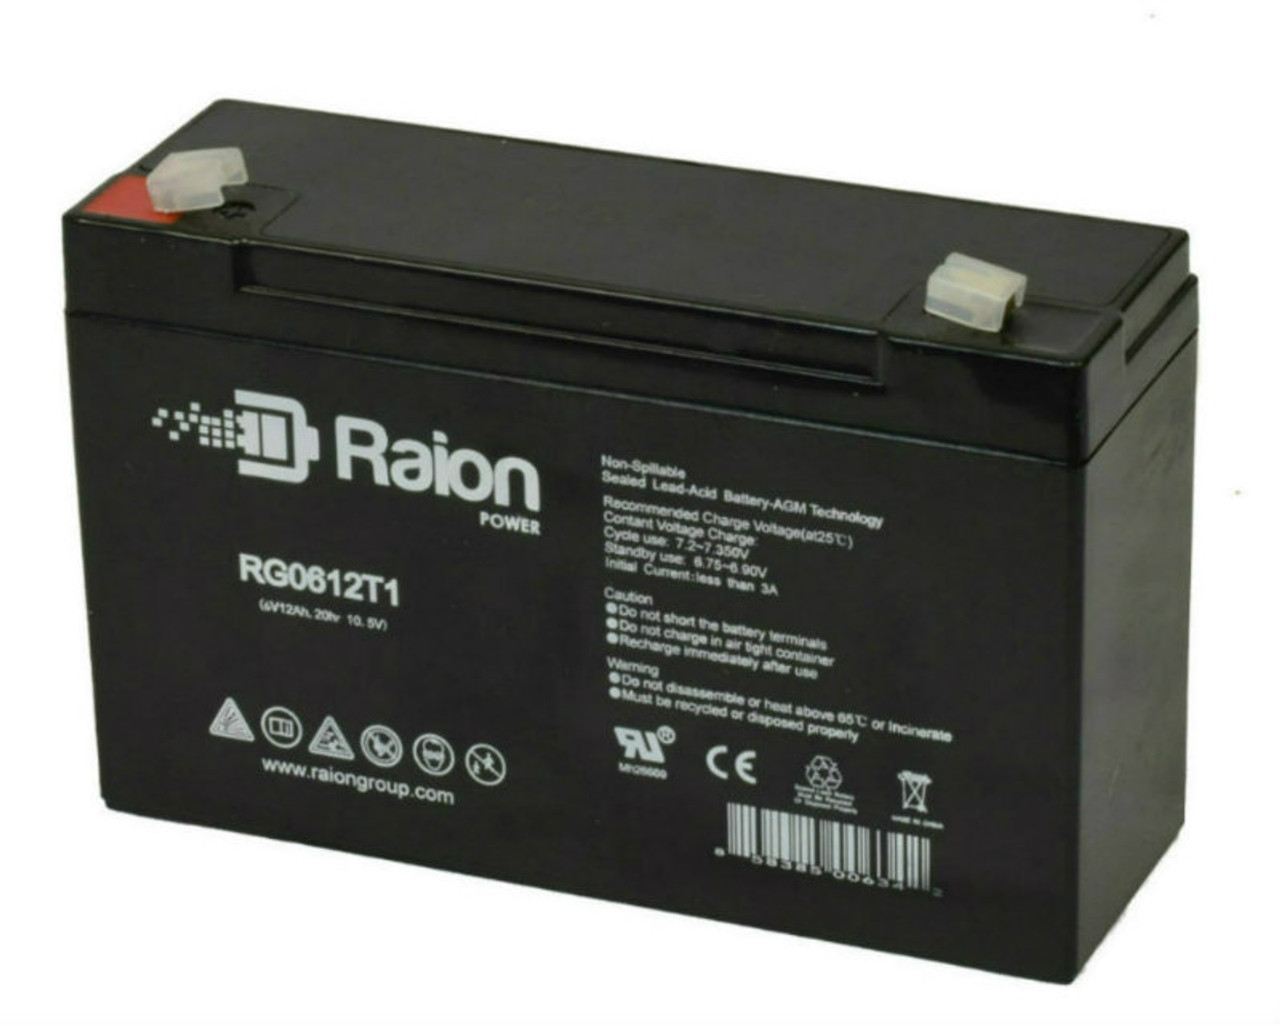 Raion Power RG06120T1 Replacement Battery for Teledyne 2IM6S8